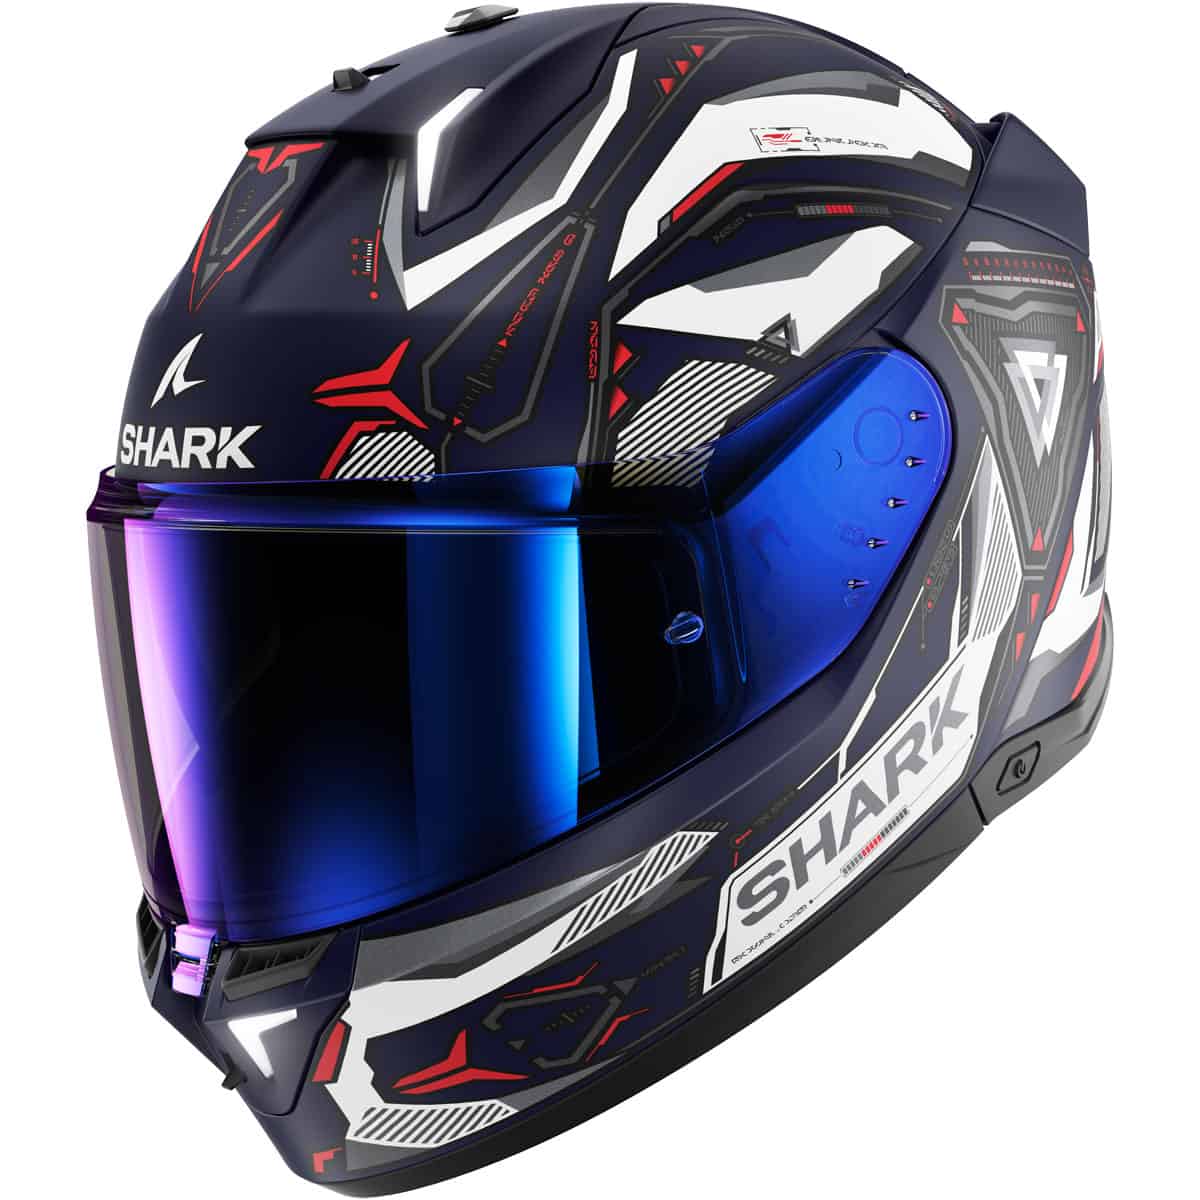 Shark Skwal i3 full face helmet: Shark were able to combine the requirements of the ECE 22-06 certification with a compact and original design inspired by motorsports and leading edge technology.4